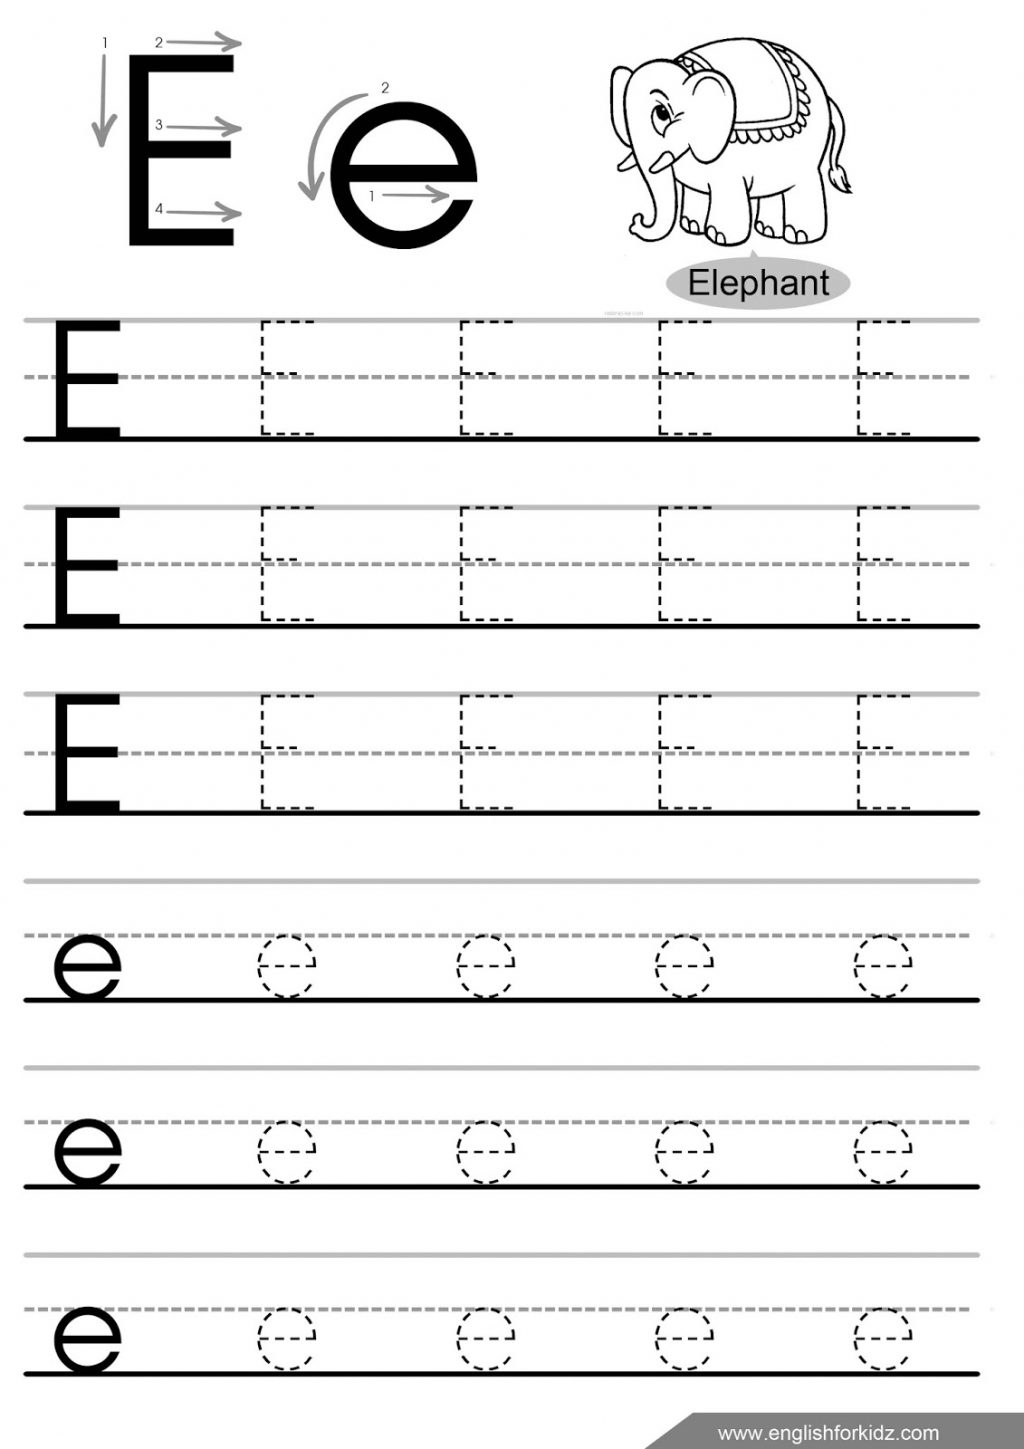 32 Fun Letter E Worksheets | Kittybabylove for Letter E Worksheets Cut And Paste